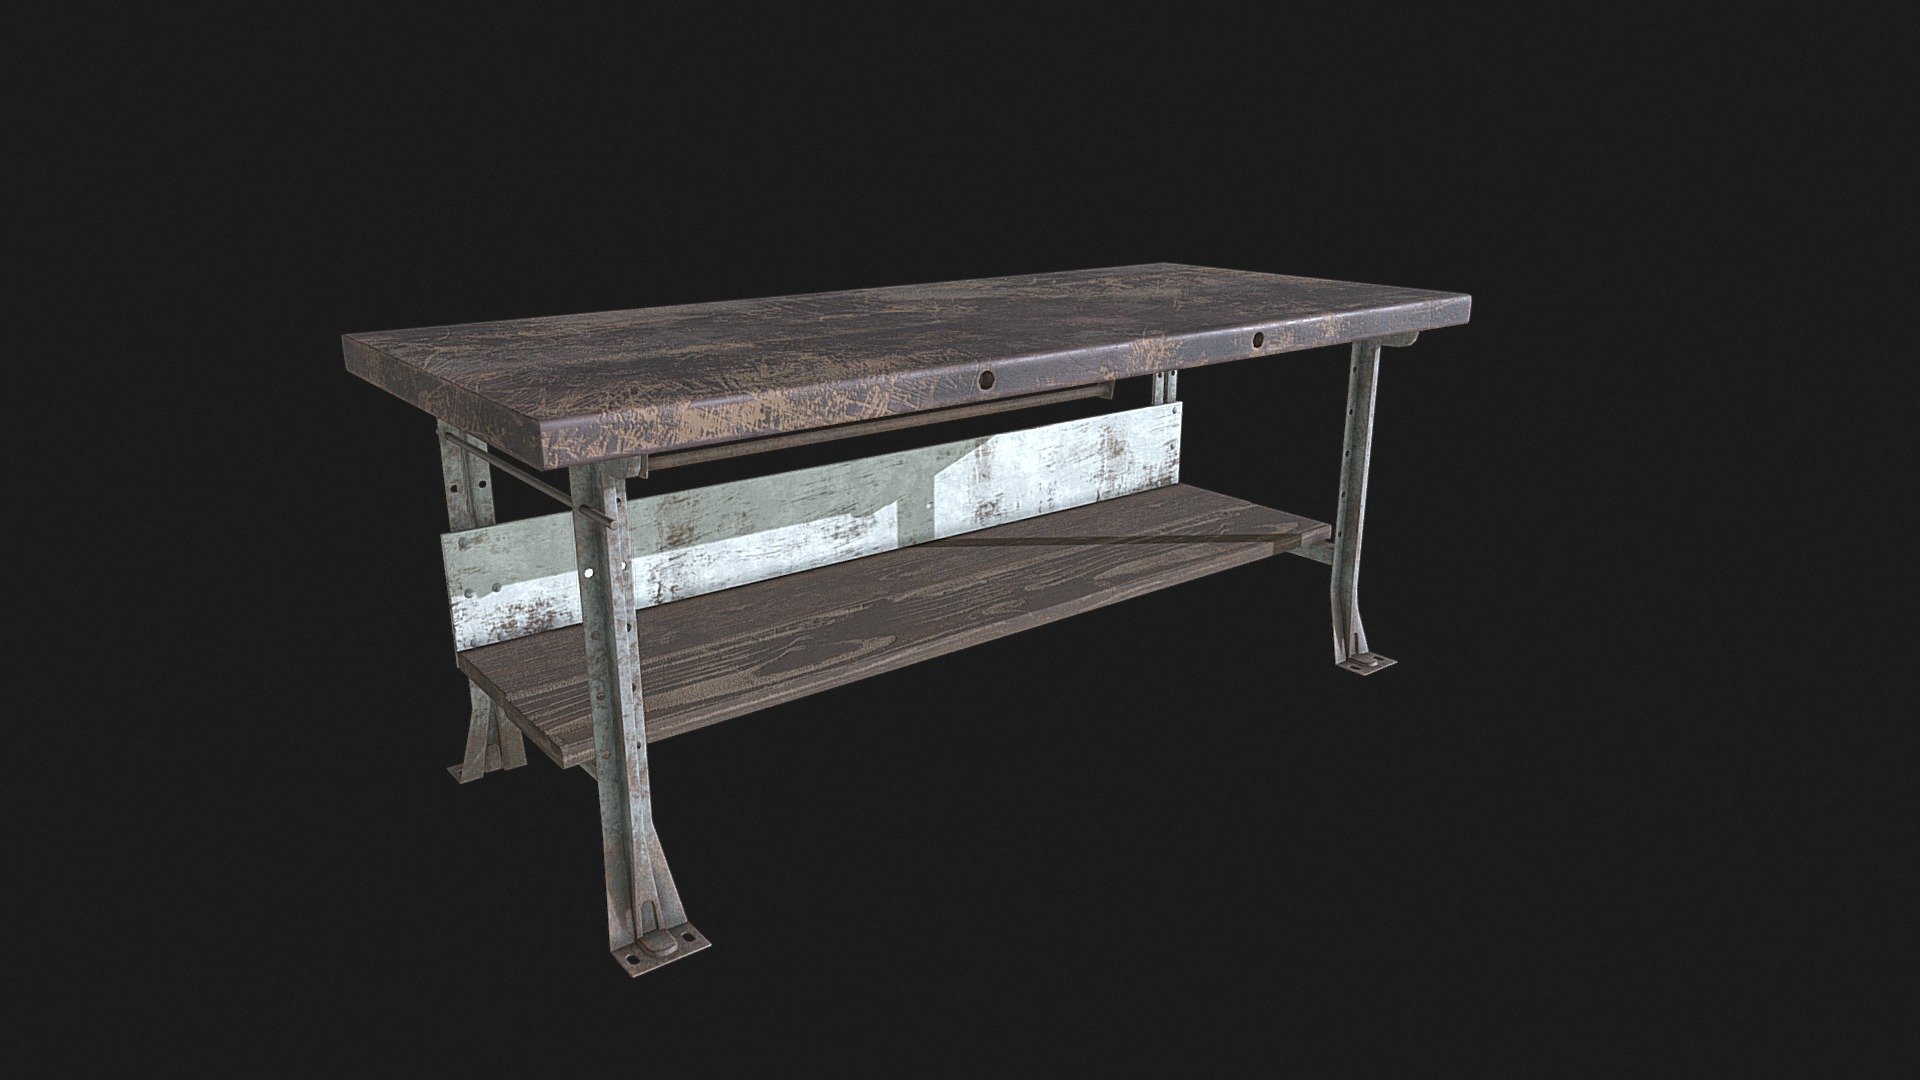 Workshop workbench I made as part of a school project - Workbench - Download Free 3D model by Eric Wallbank (@Ericwallbank) 3d model